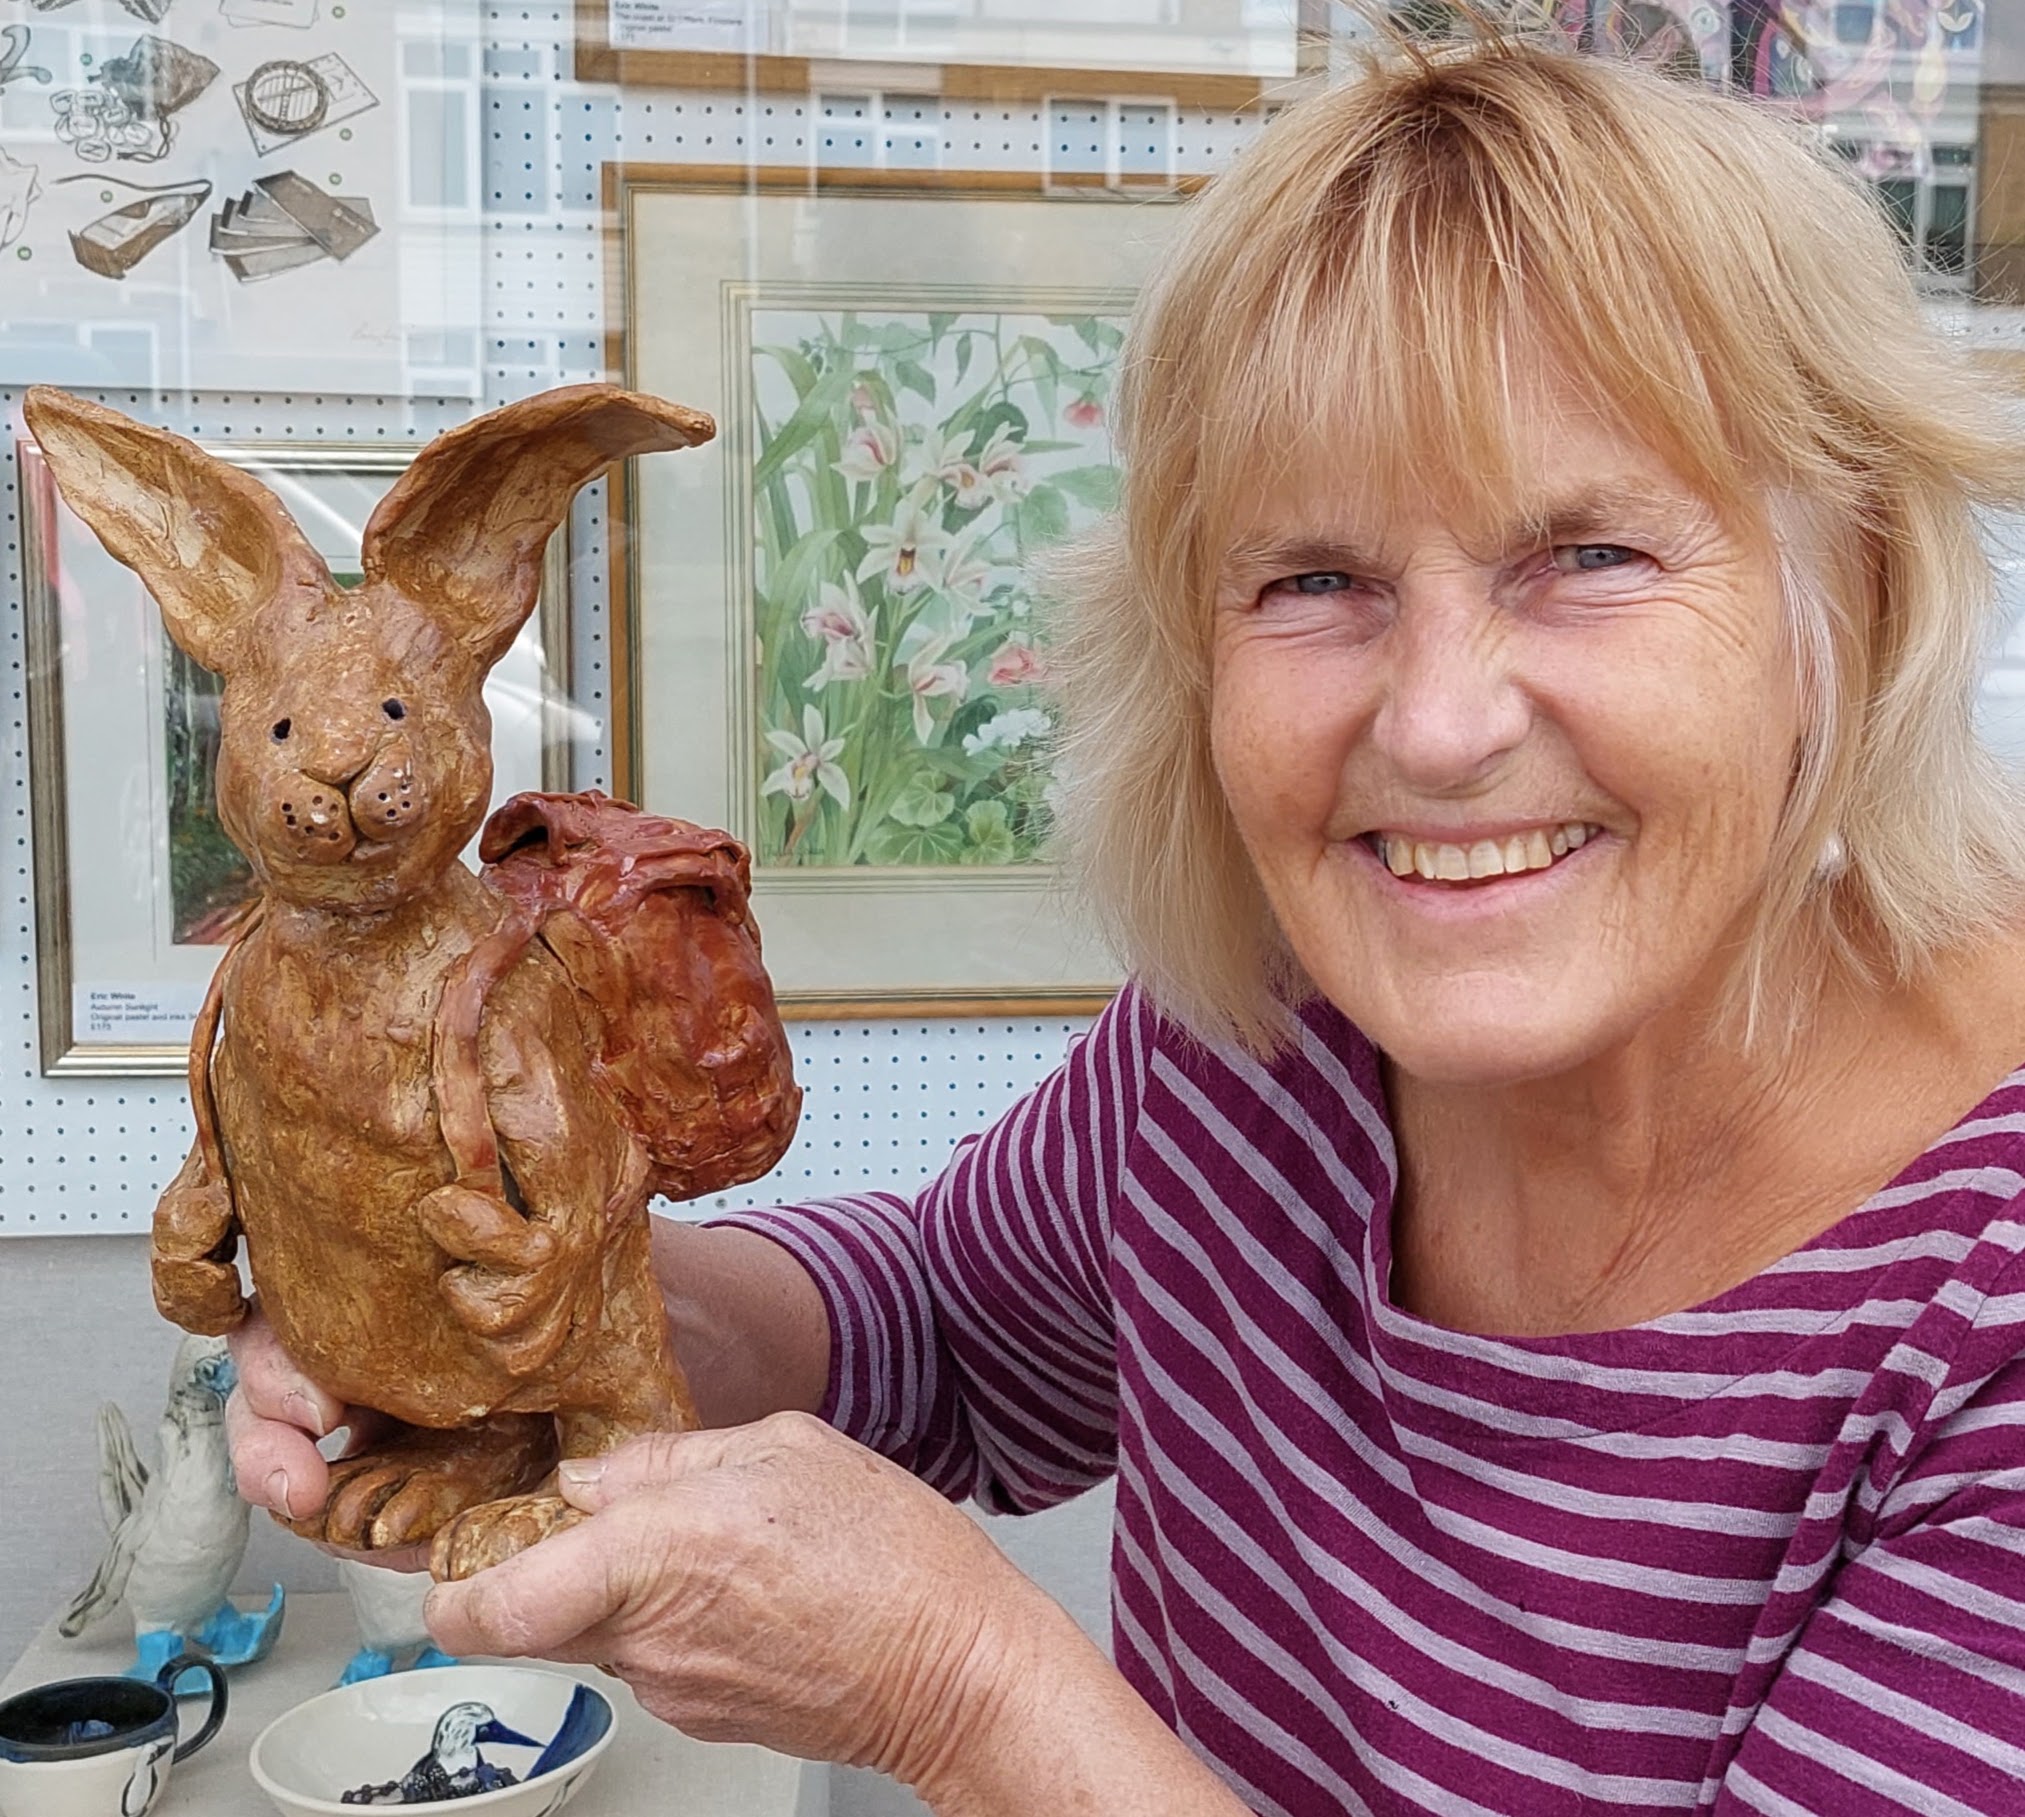 Potter Alison Holmans of The Chicken Run Studio holding a hand built quirky stoneware hare with a rucksack.